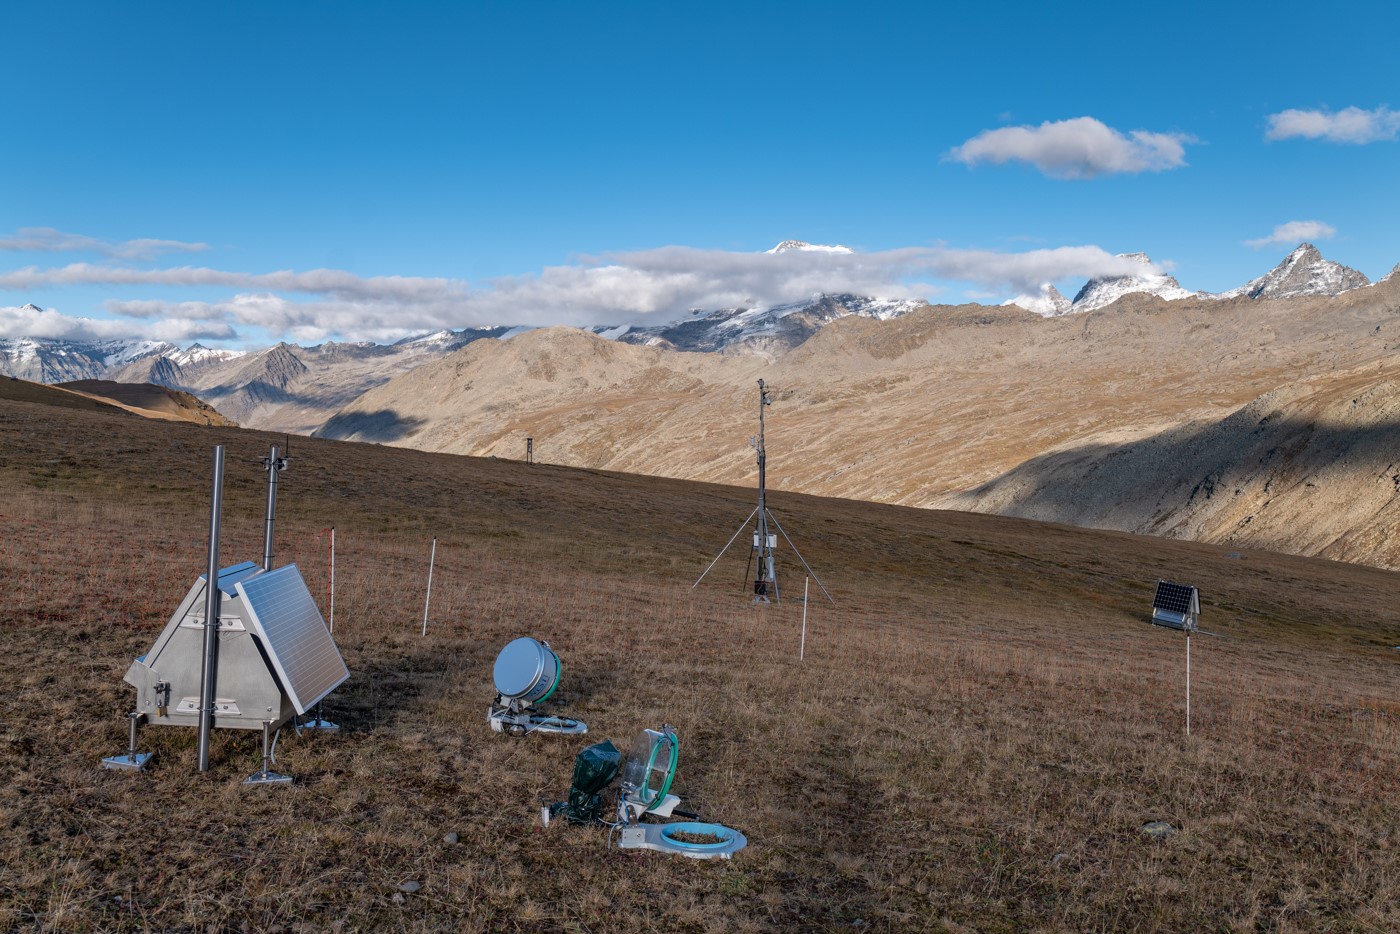 The Eddy Covariance tower and the fixed flux-chambers at Nivolet plain in Gran Paradiso National Park